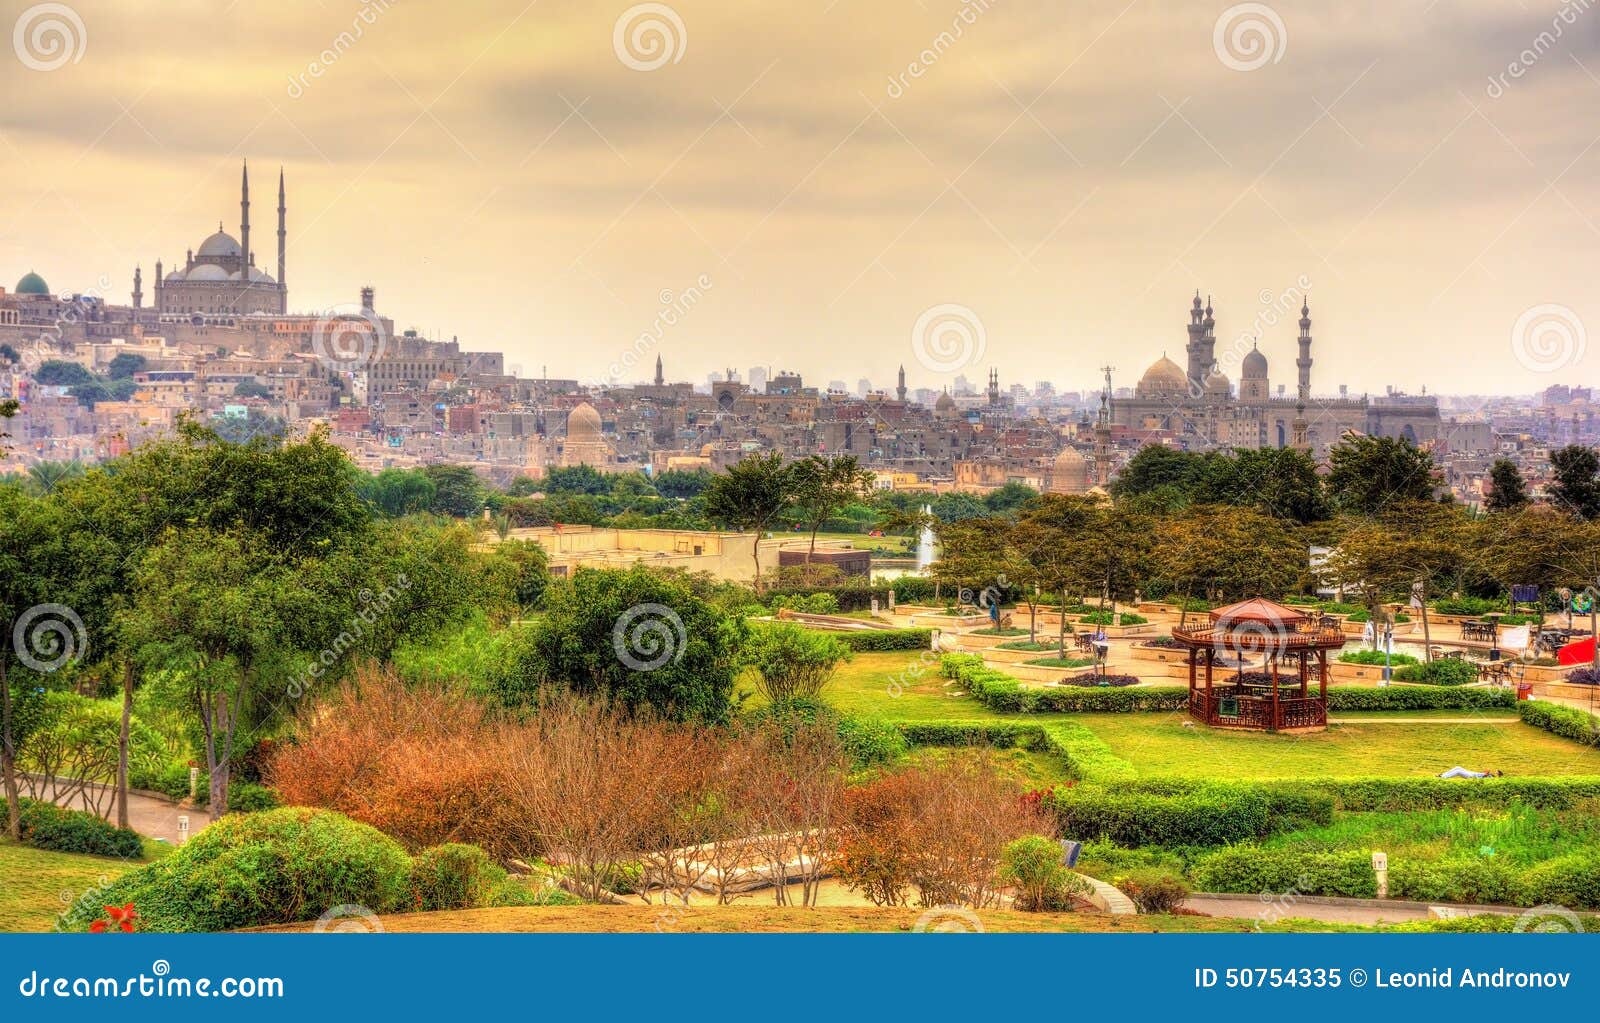 view of the citadel with muhammad ali mosque from al-azhar park